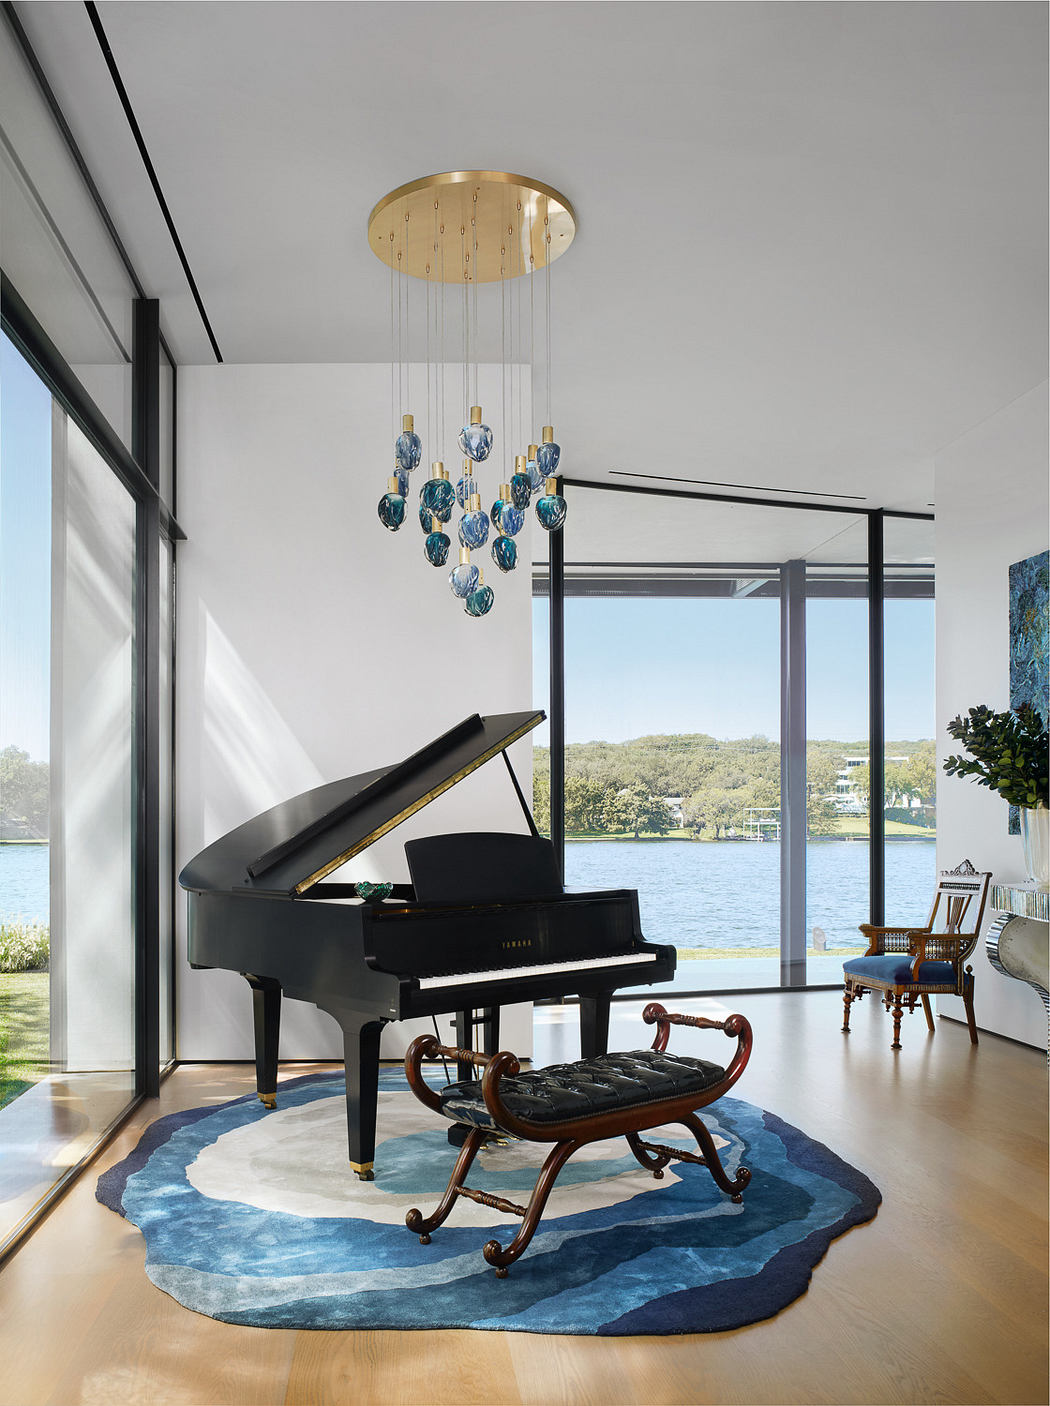 Modern room with grand piano, blue chandelier, and lake view.